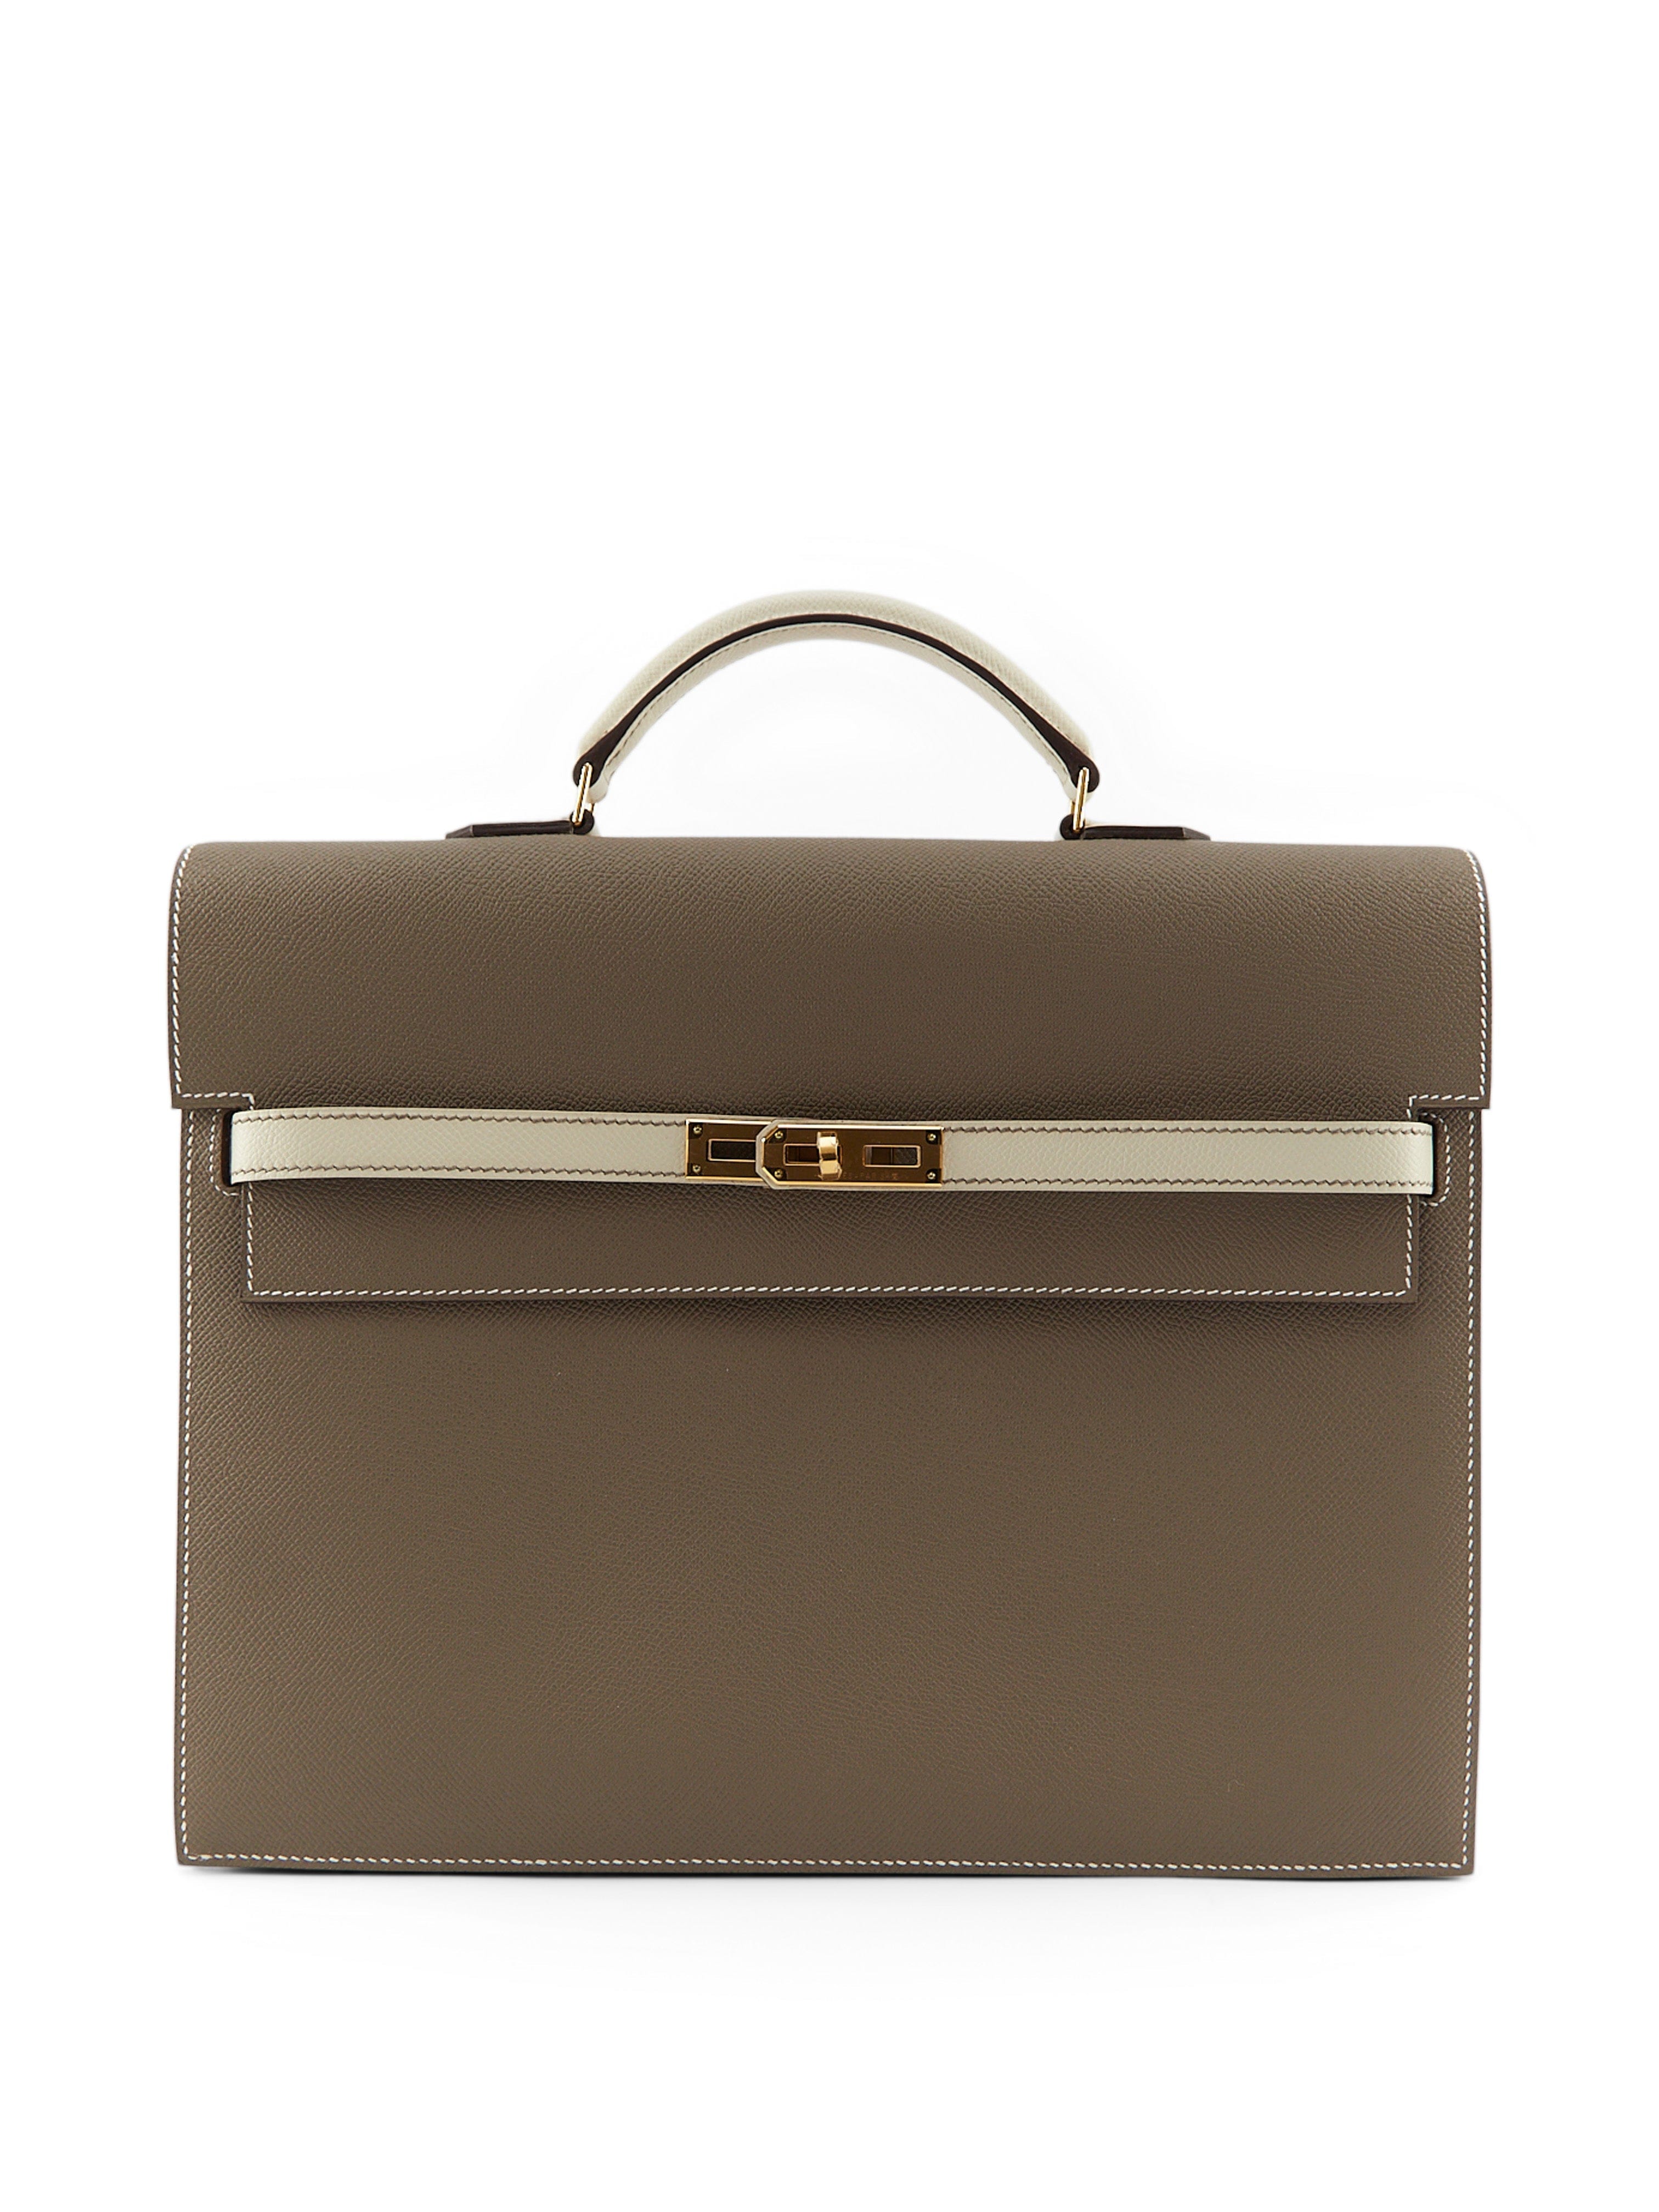 www.LuxuryVault.London HERMÈS KELLY DEPECHES 34CM HSS SPECIAL ORDERE ETOUPE & CRAIE Epsom Leather with Gold Hardware